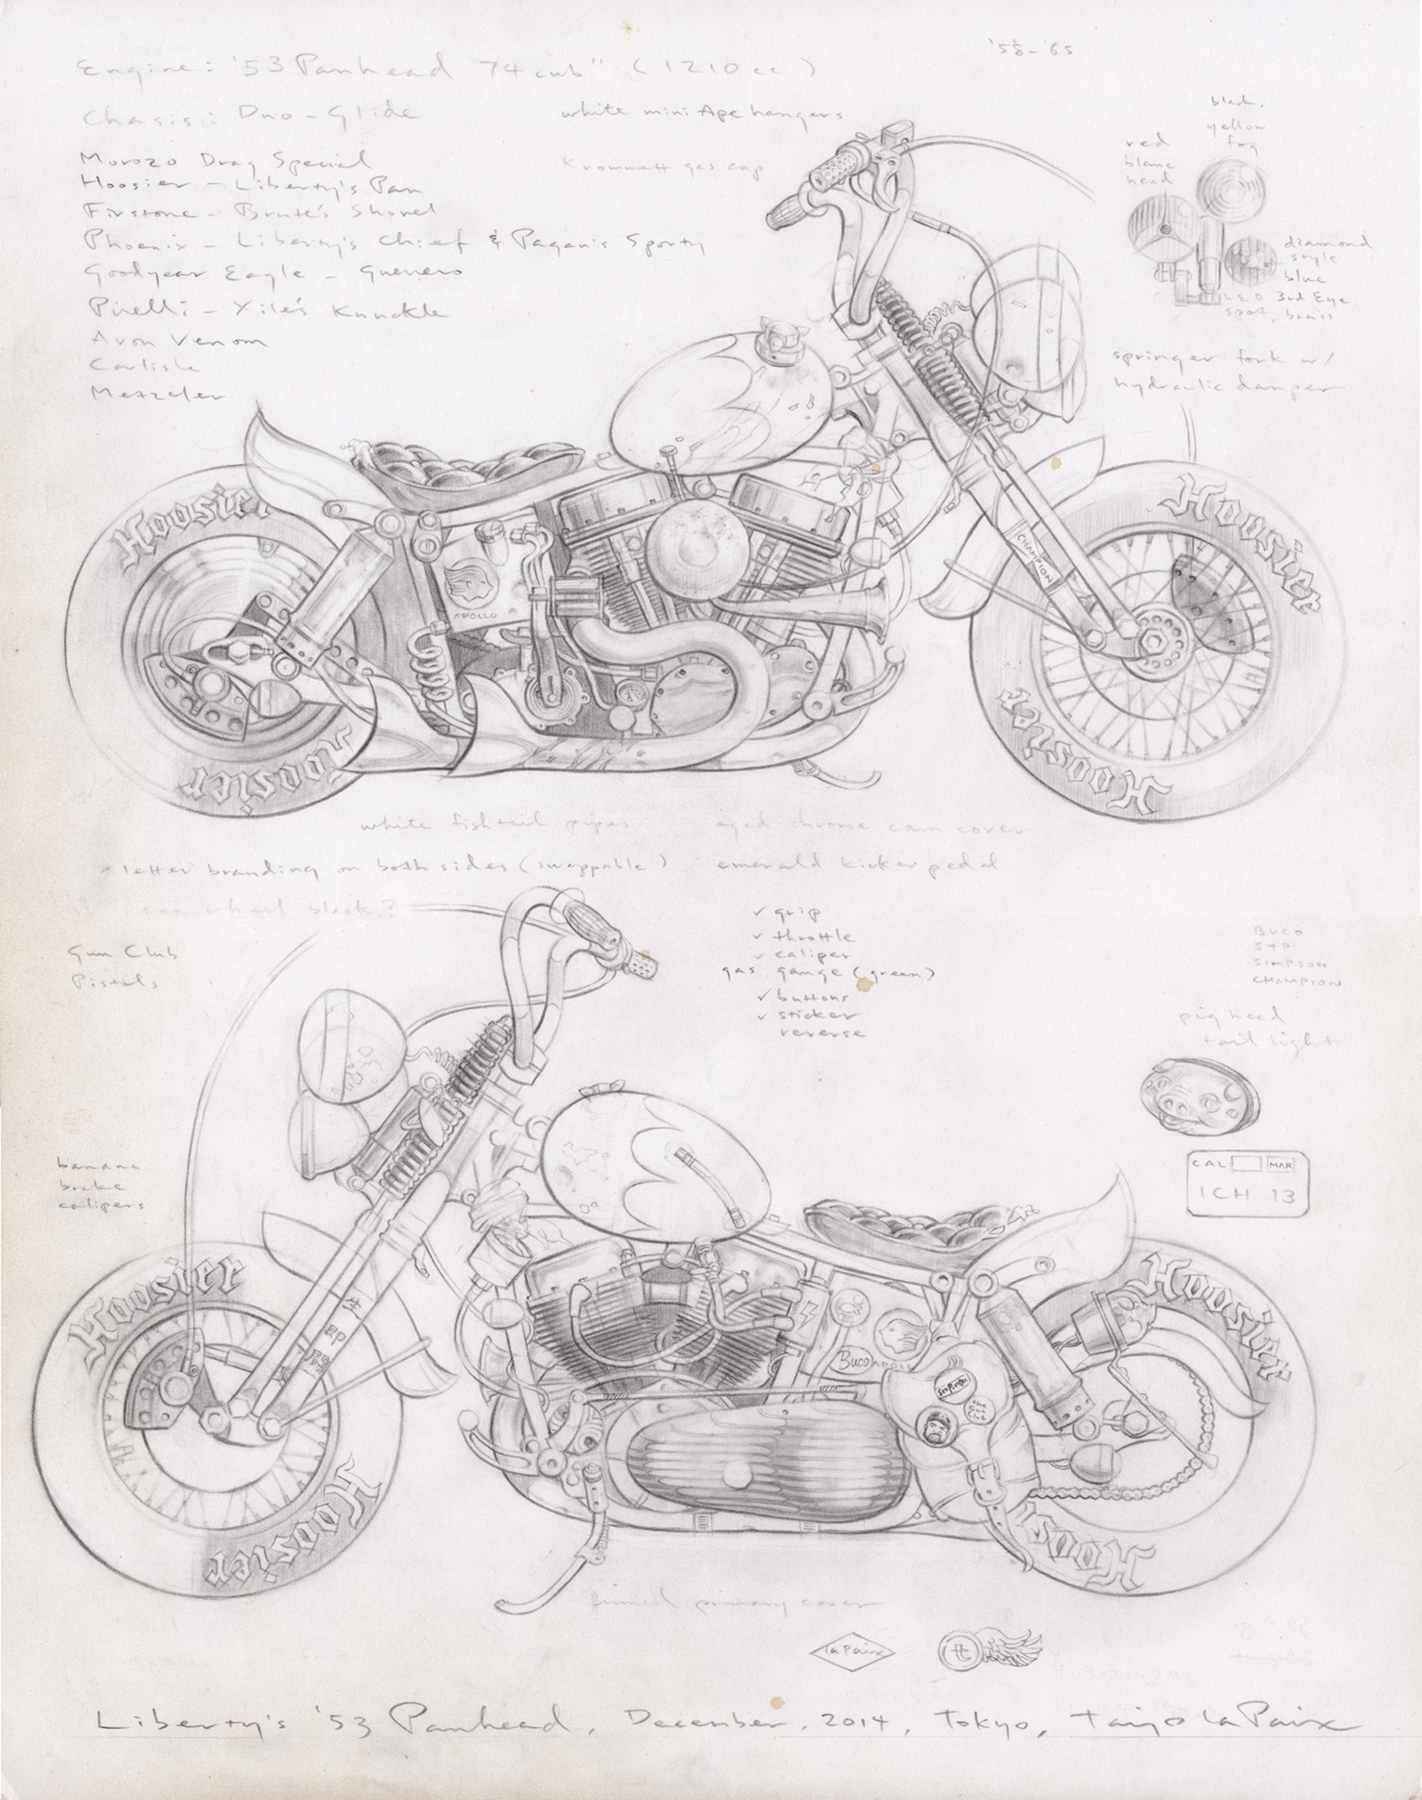 Liberty’s ’53 Panhead, 2014, pencil on paper, 14 x 11 inches